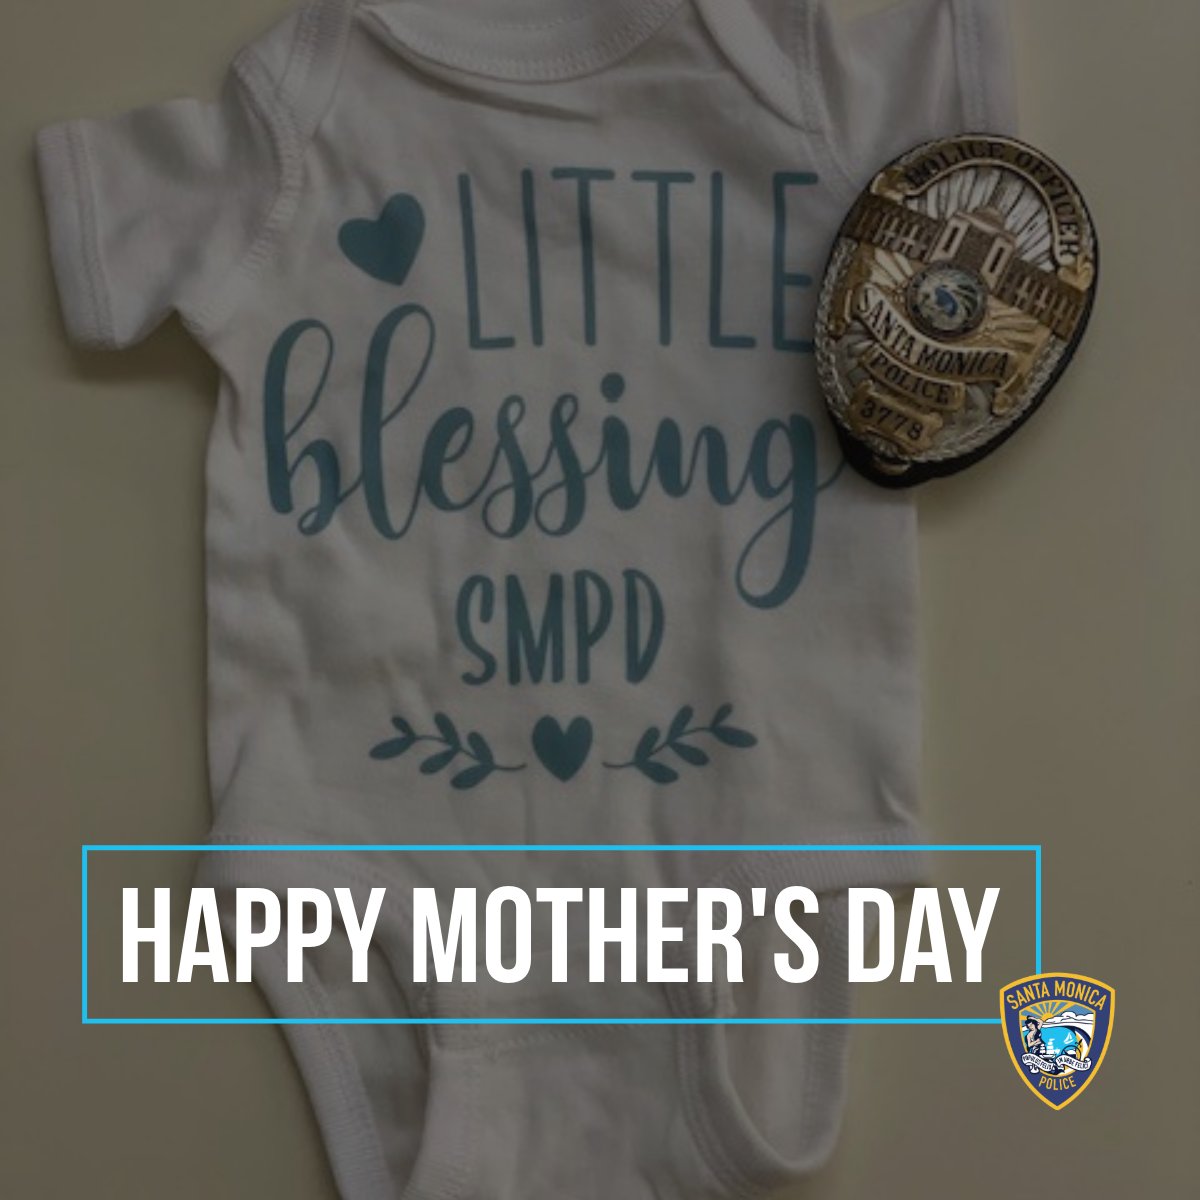 Happy Mother's Day from all of us at SMPD! Today, we celebrate every mother, especially the remarkable moms on our team—police officers, forensic scientists, custody officers, traffic services officers, PSOs, CSOs, records technicians, and crime analysts (just to make a few).